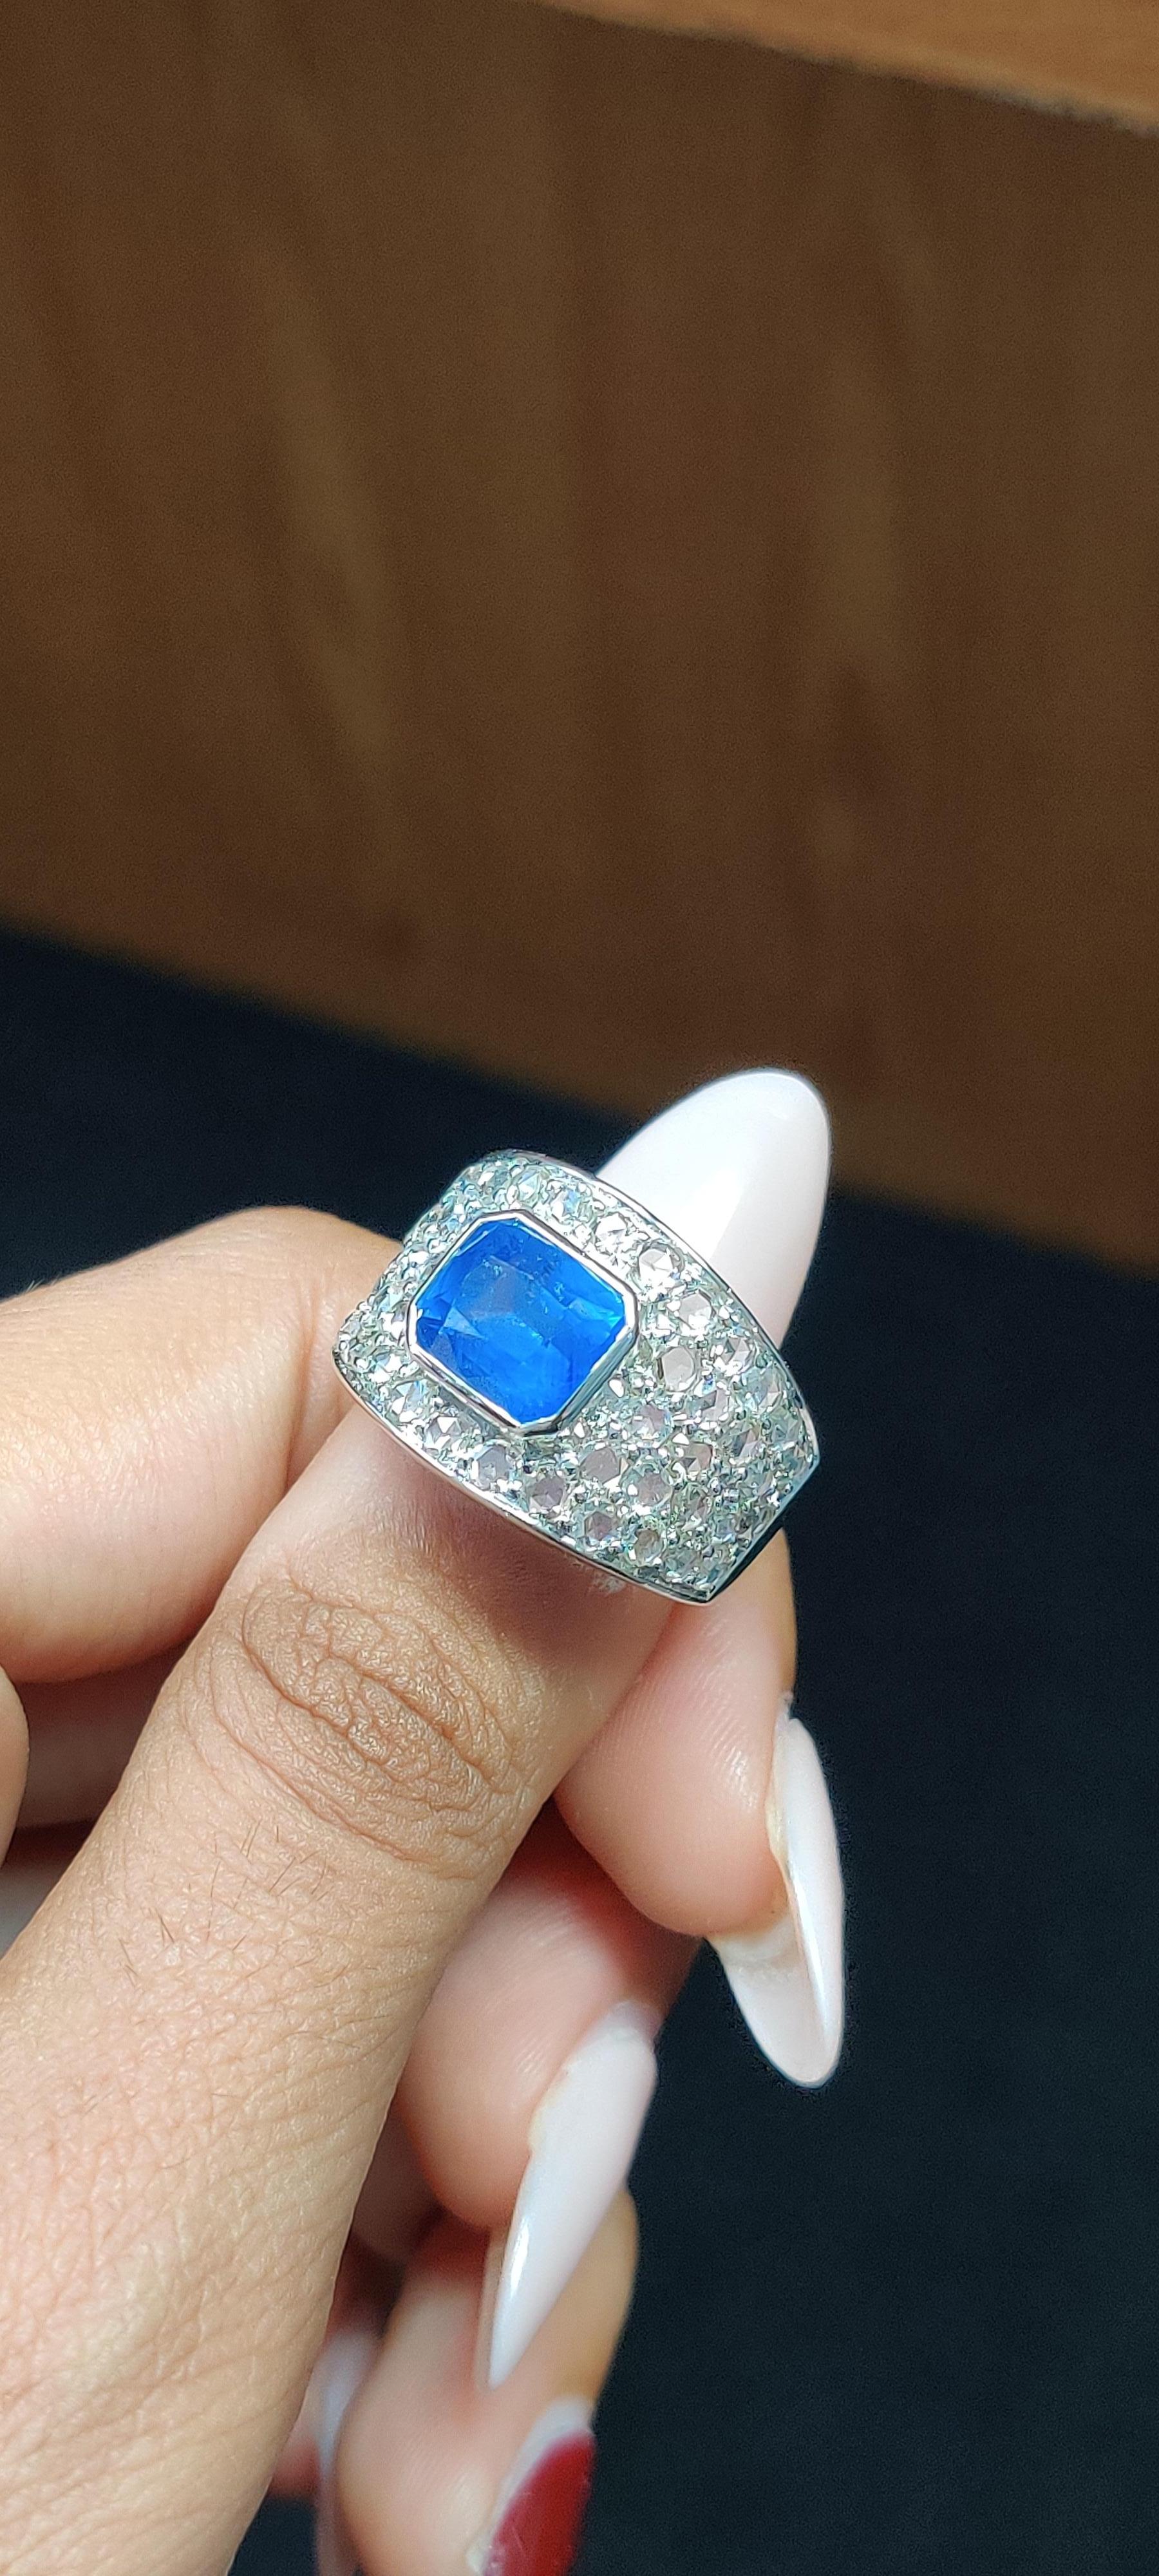 Men's 3.56 Carat Ceylon Sapphire Ring with Rose Cut Diamonds in 14k White Gold  For Sale 2